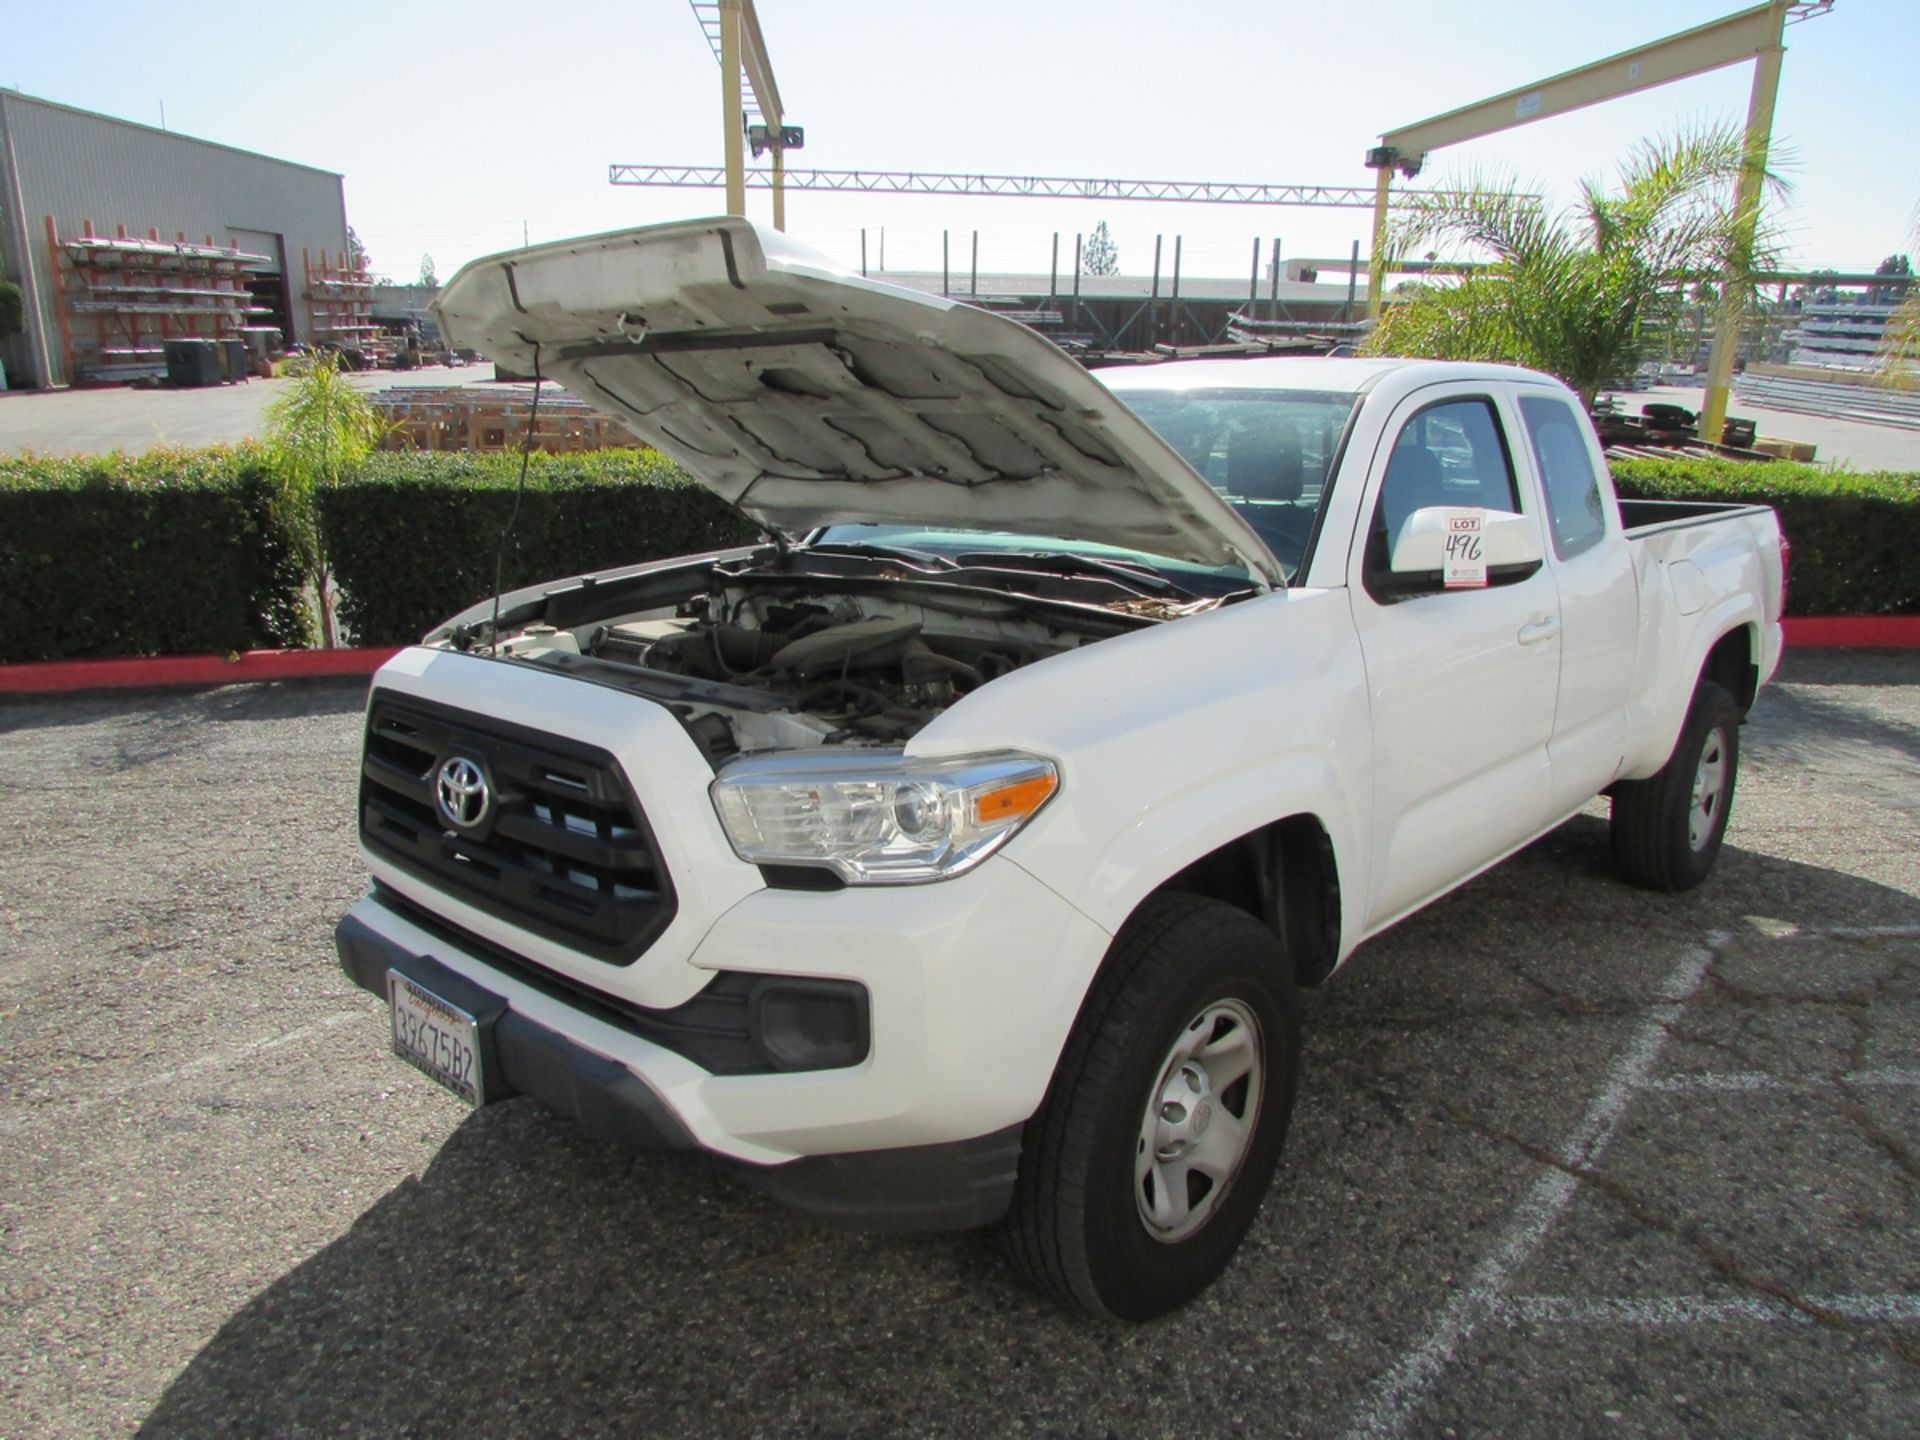 2016 TOYOTA TACOMA 2X4 EXTENDED CAB PICKUP TRUCK, 6' BED, 2.7L INLINE 4 CYLINDER ENGINE, AUTOMATIC - Image 16 of 19